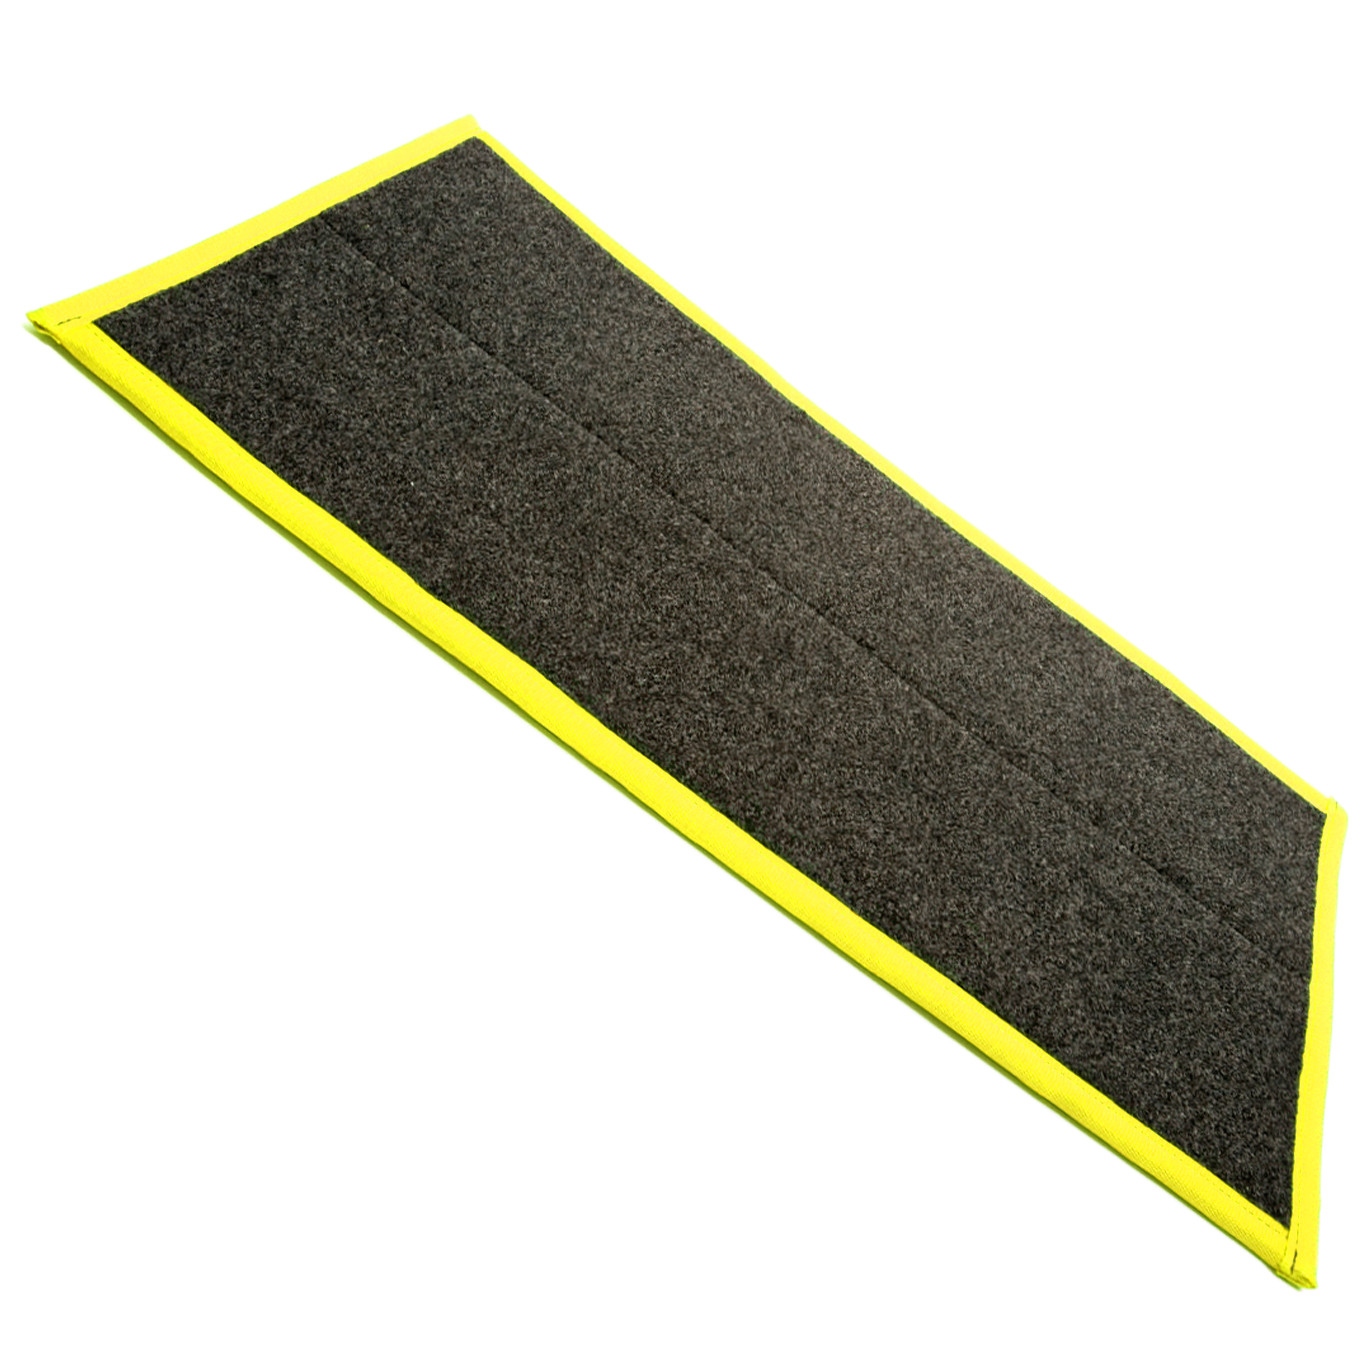 Detail view for PureTrack Replacement Pad with Yellow Trim. Disinfecting Shoe Mat System.